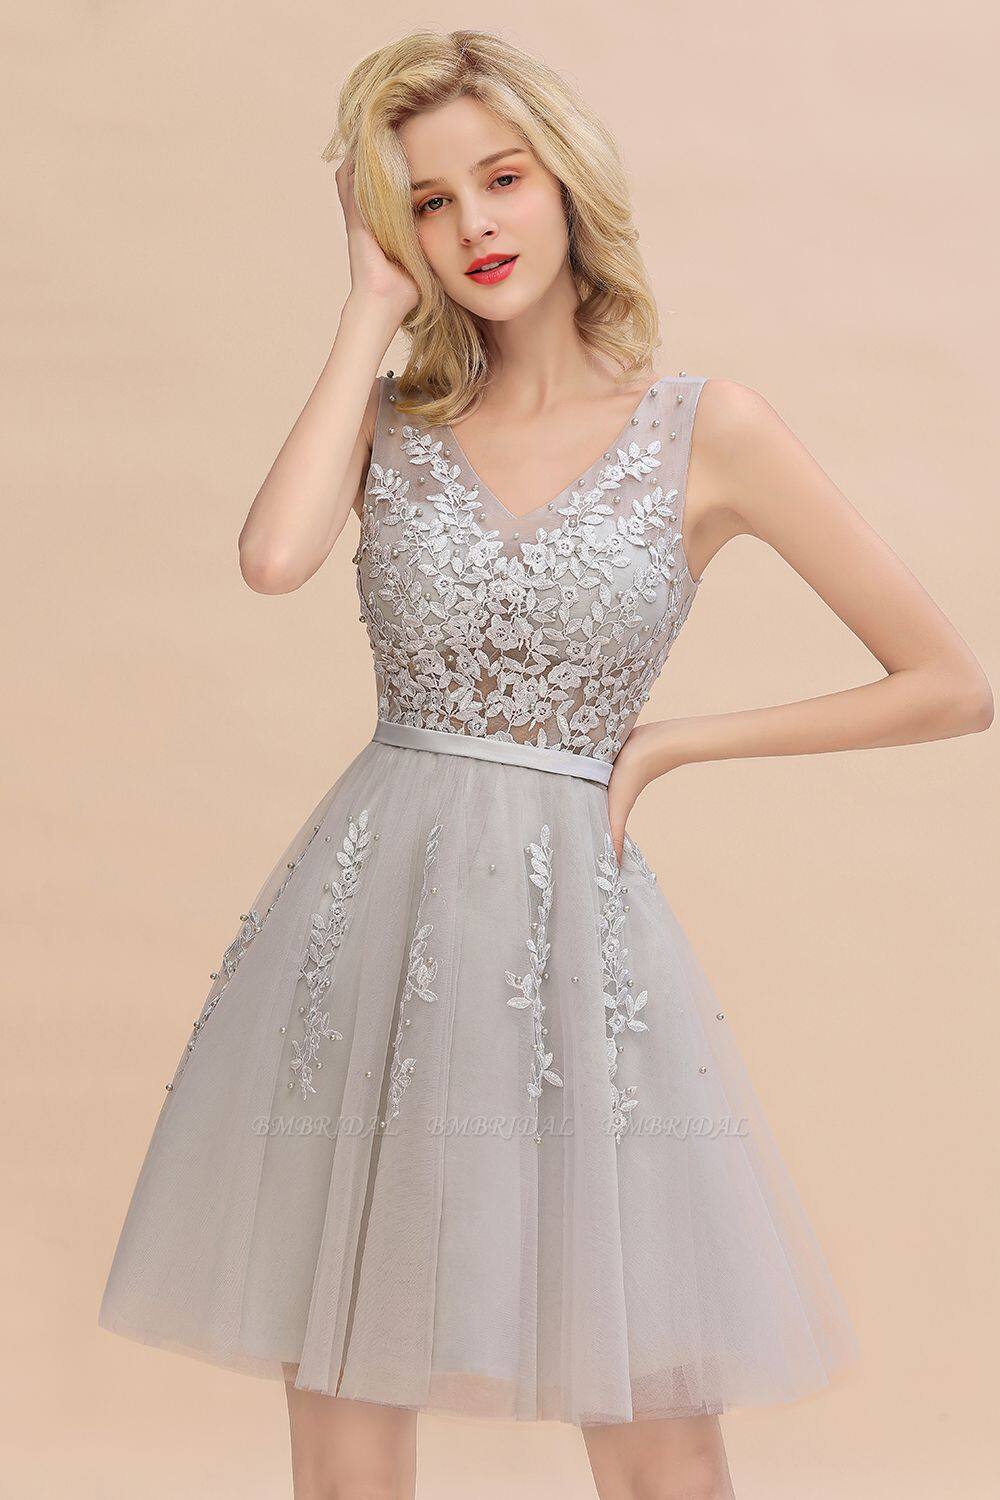 BMbridal Short Party Dresses, $49/pcs, $110 for 3 pcs + Free Shipping, Rush Delivery Available